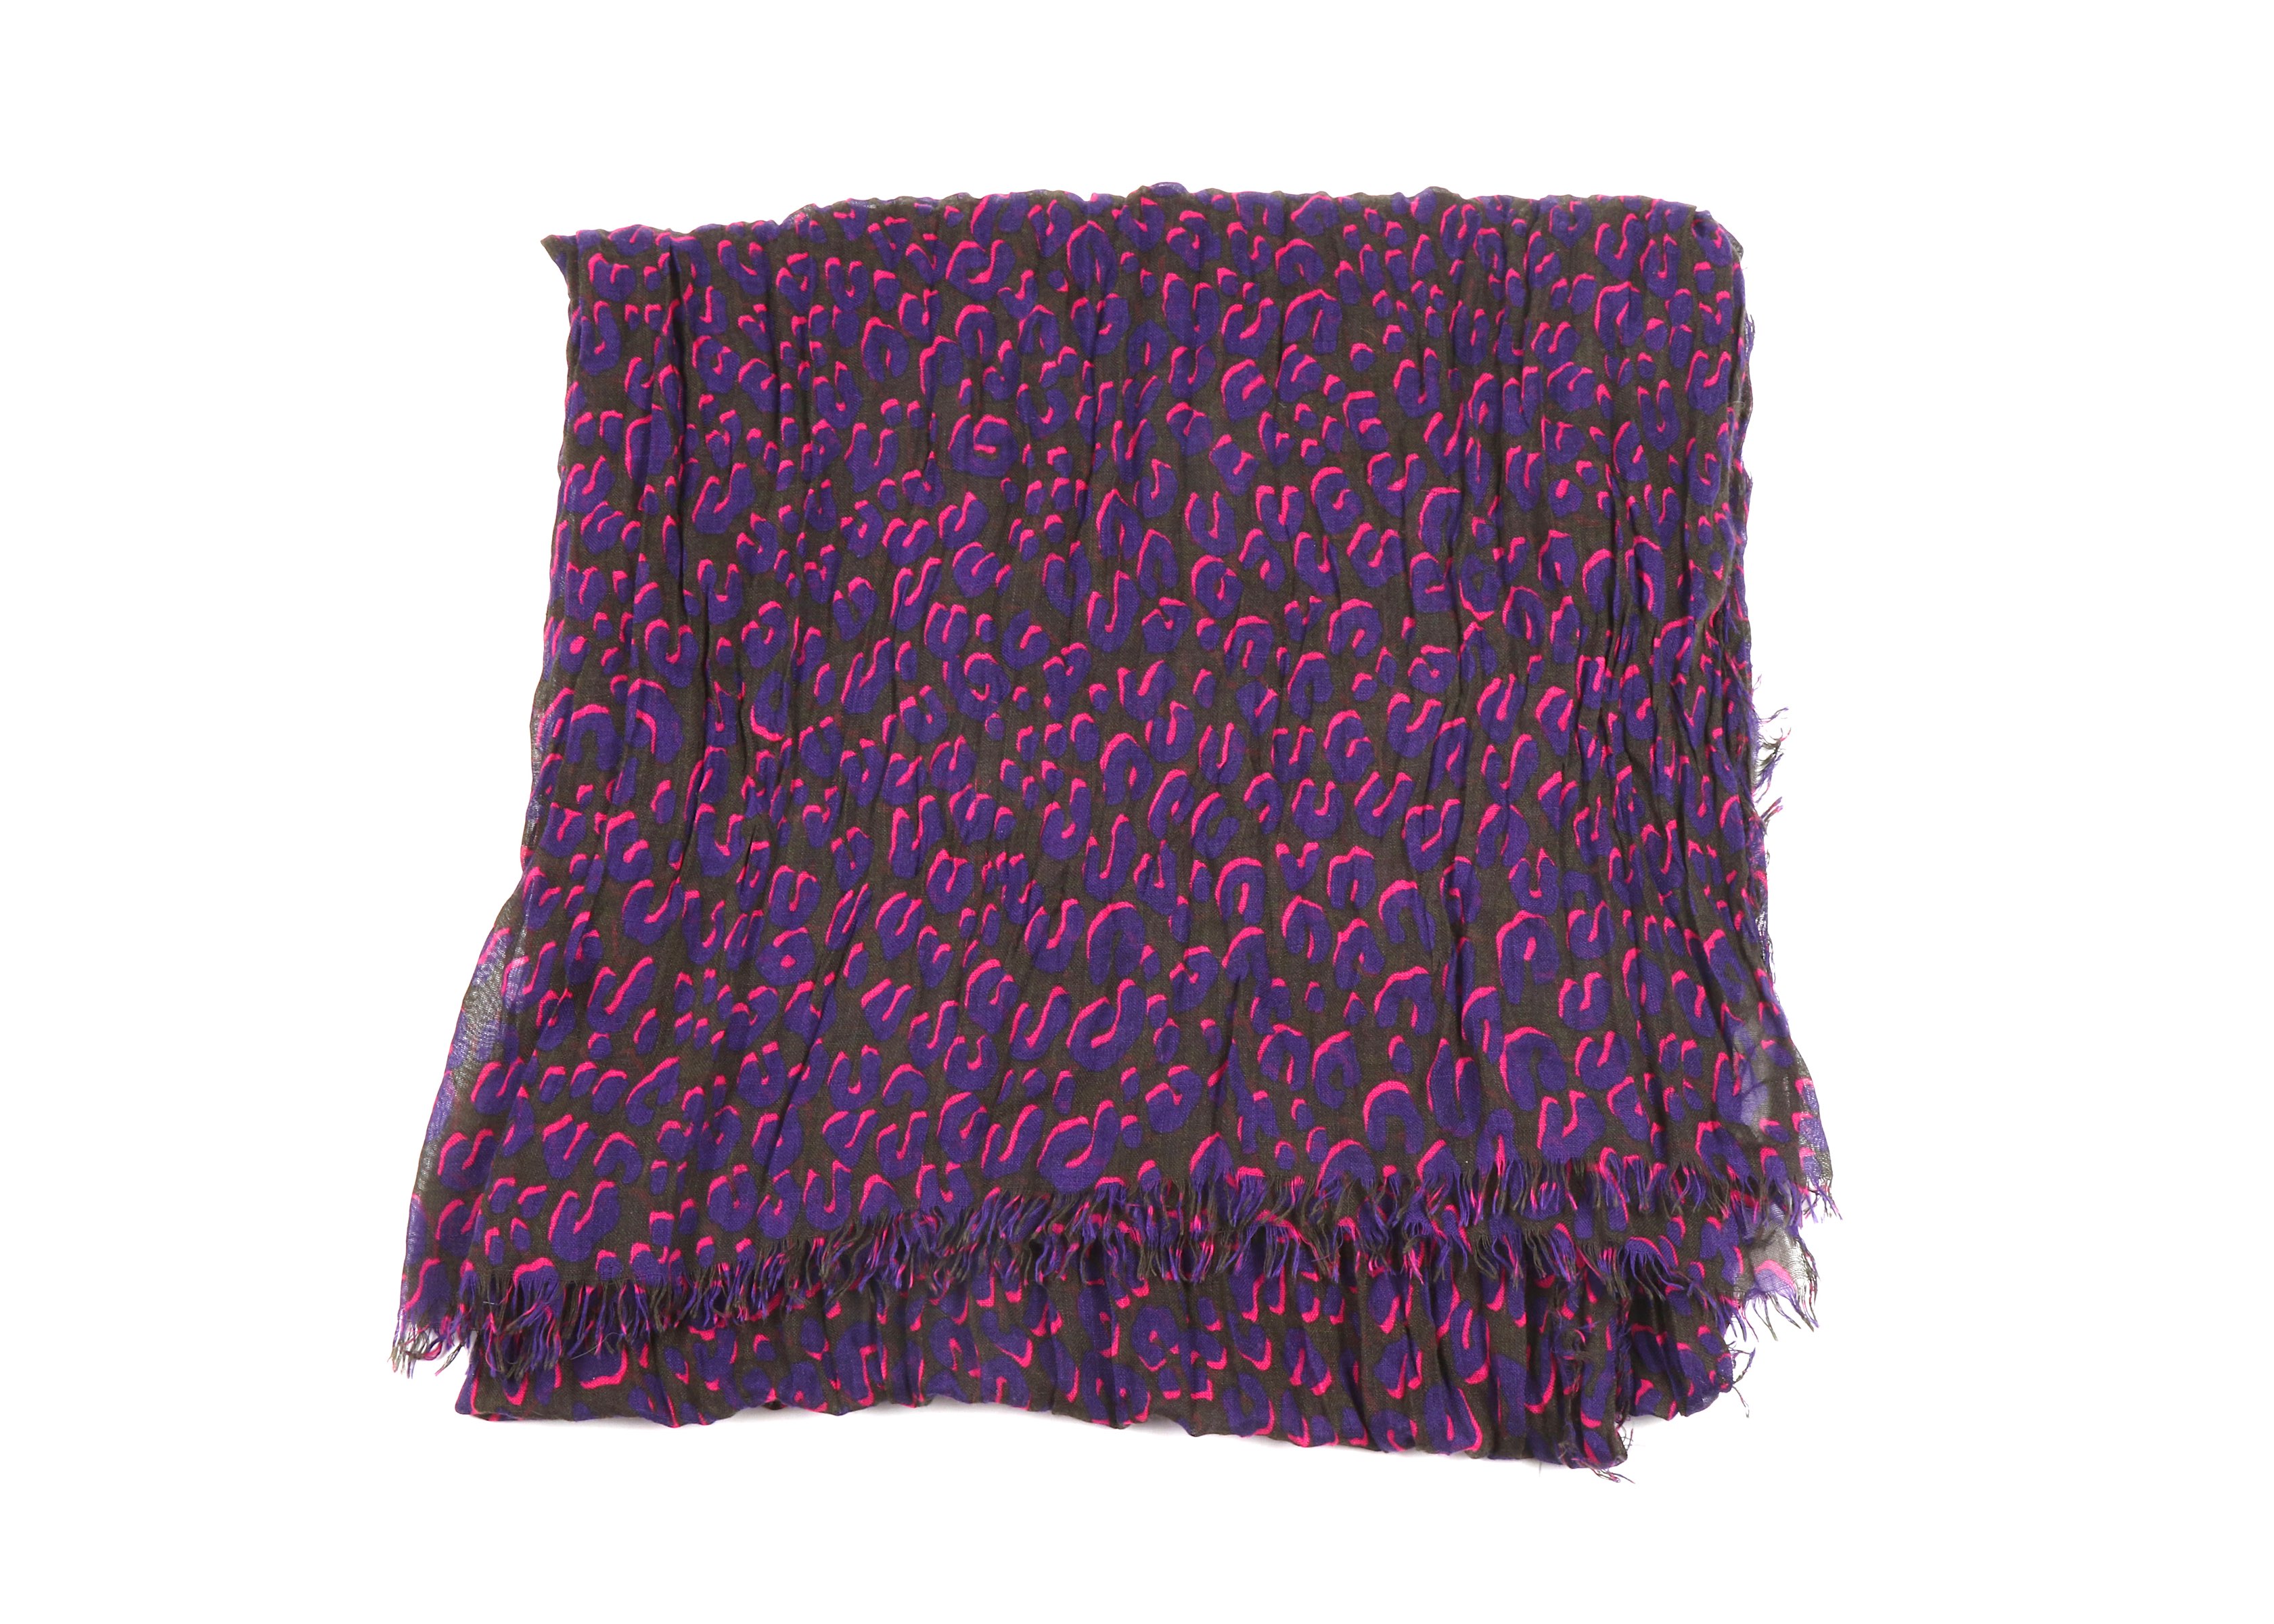 Louis Vuitton Stephen Sprouse Scarf, cashmere and silk mix with pink and purple design on black,